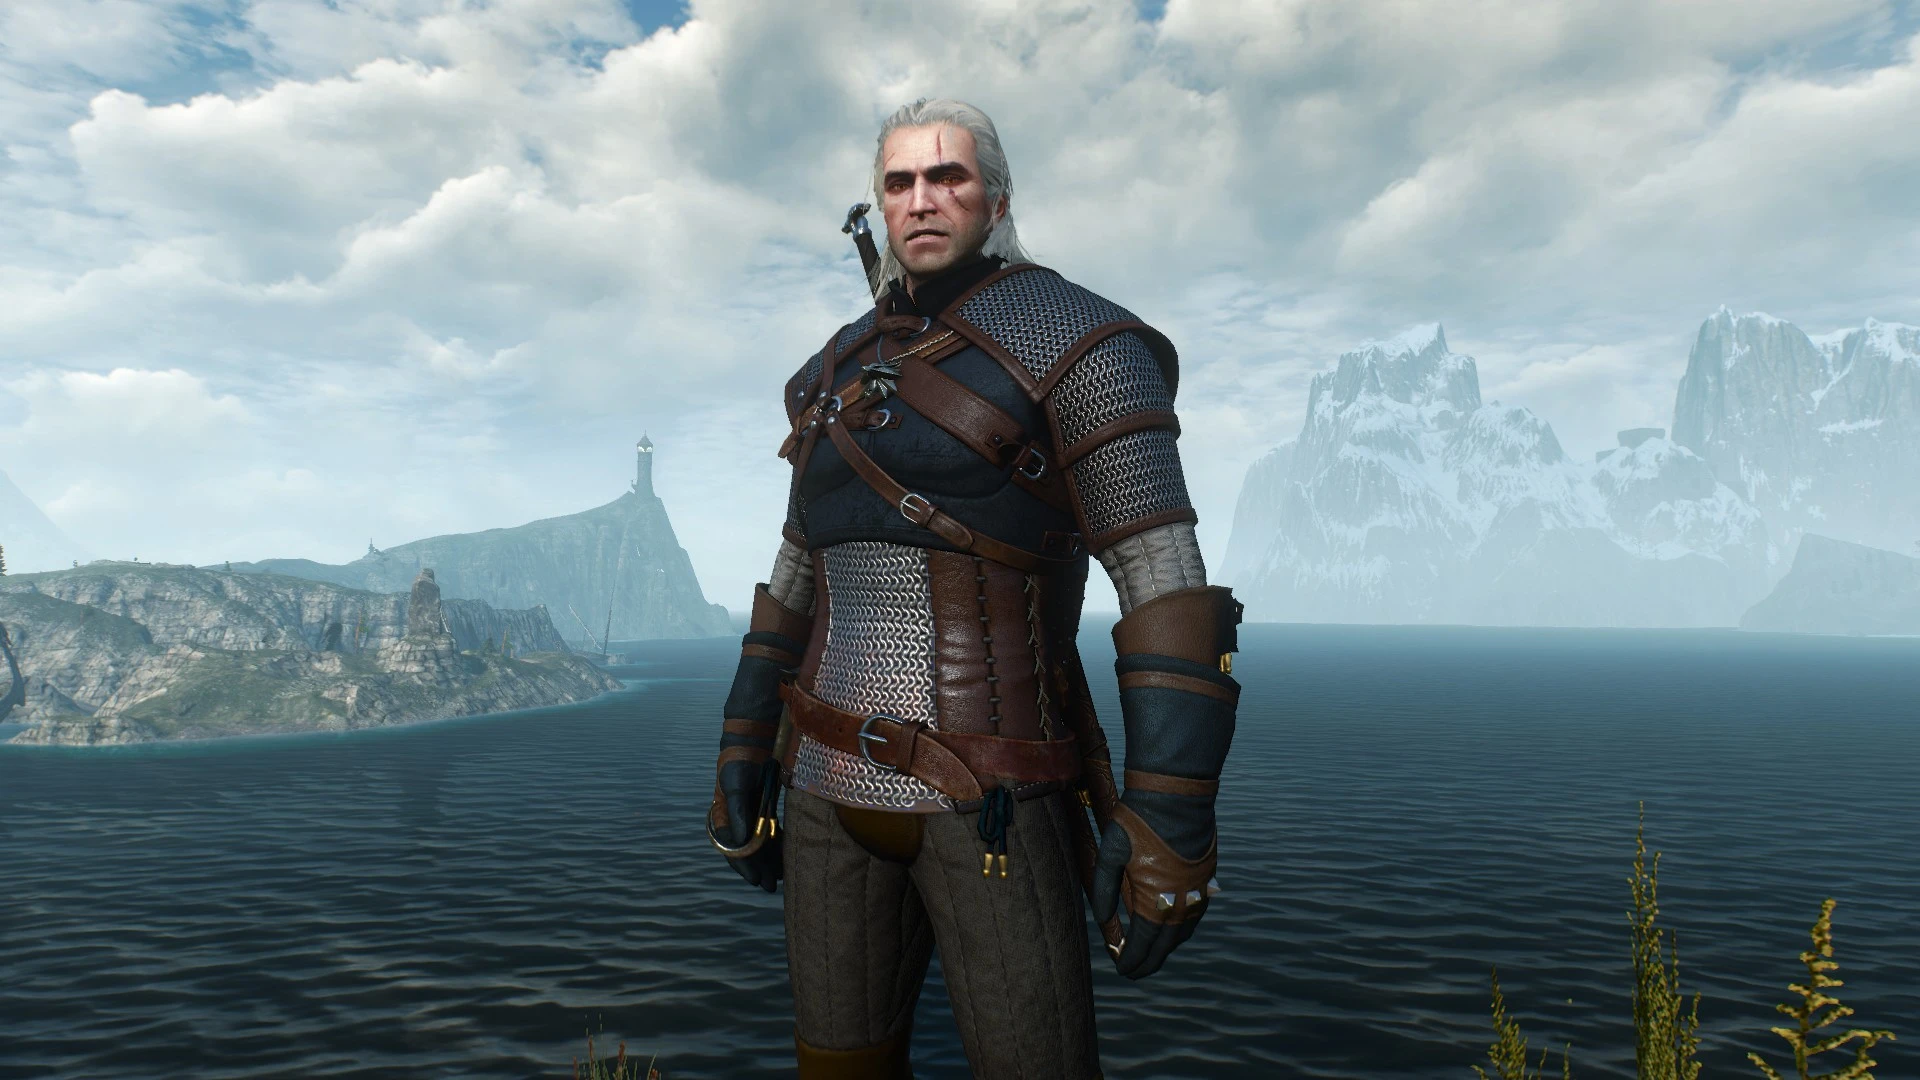 Best the witcher 3 armor фото 50